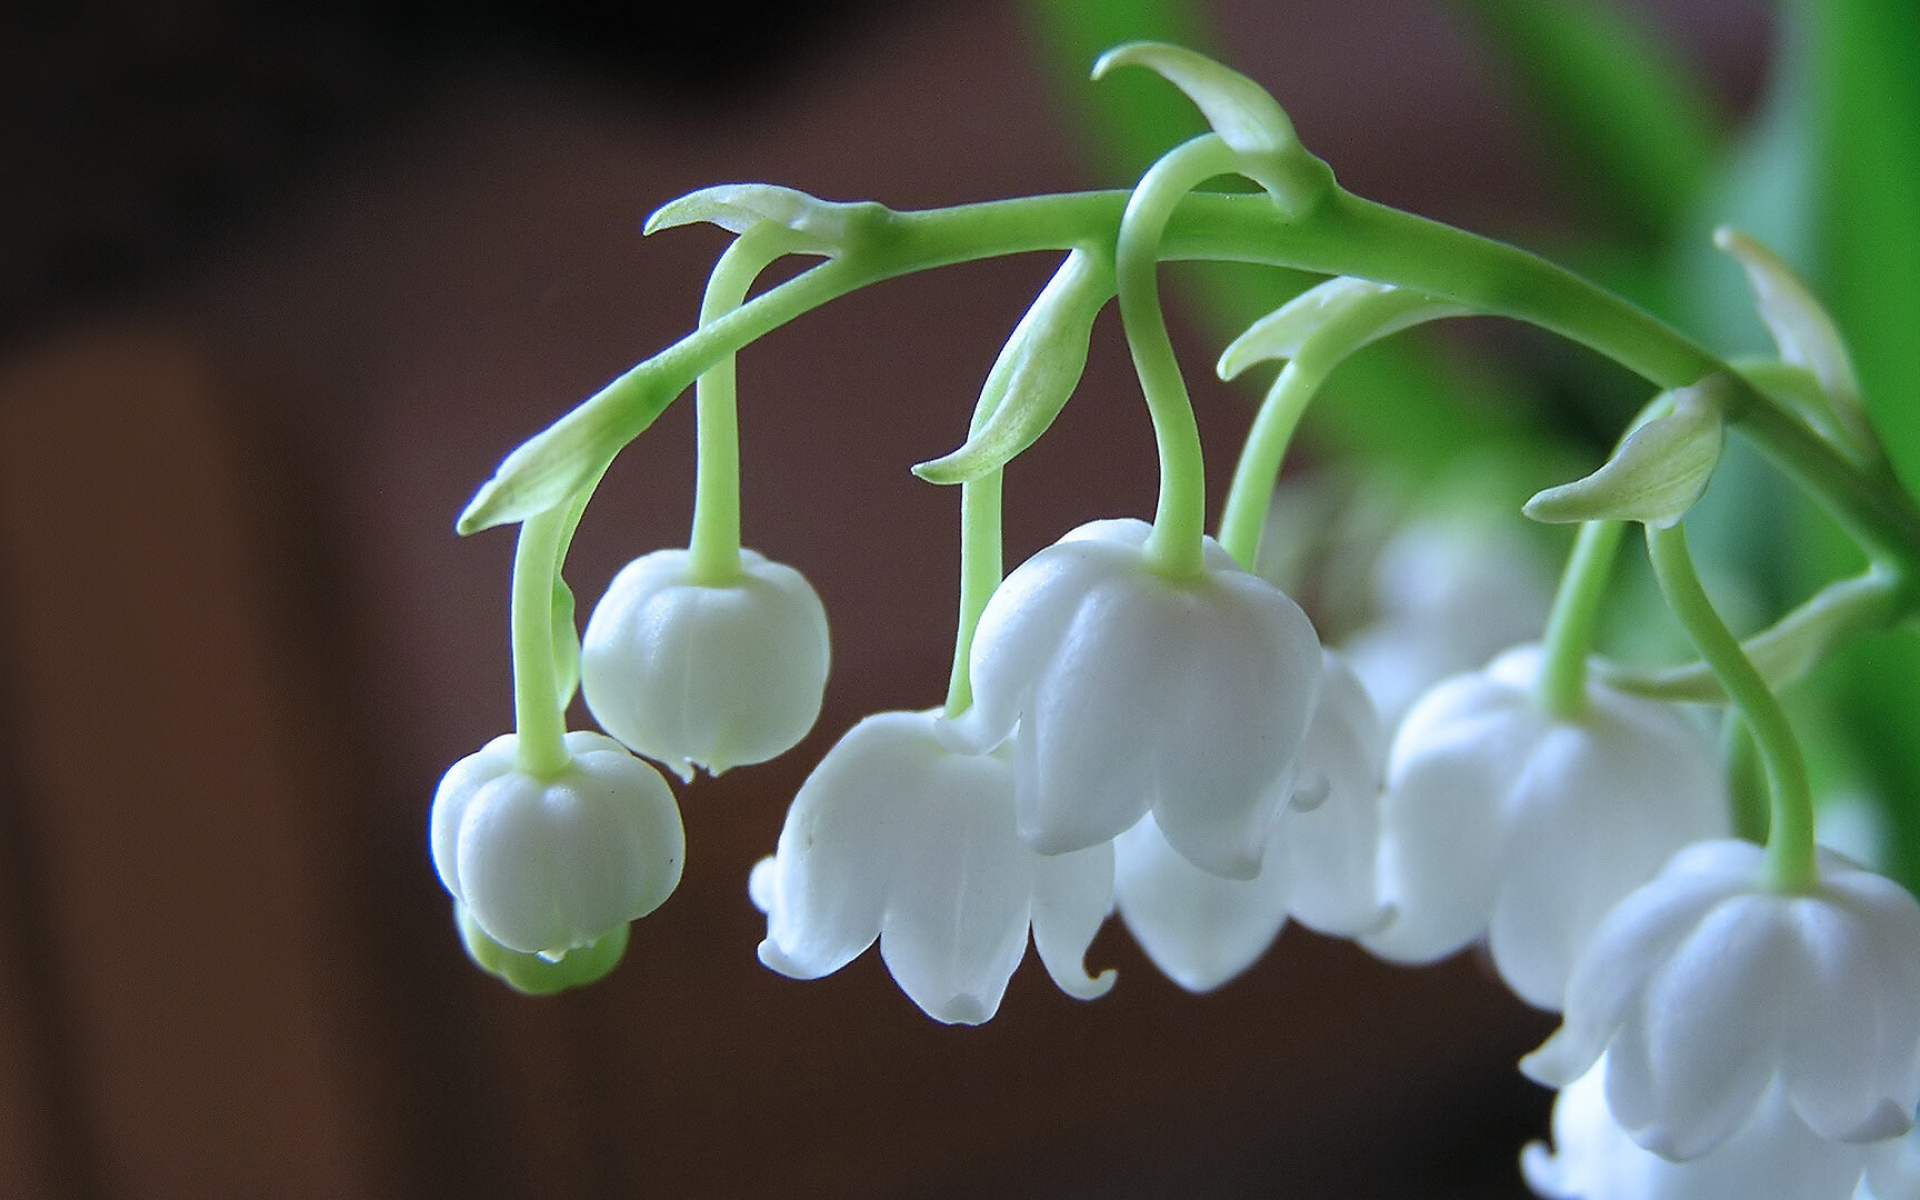 Lily of the Valley: Flowers are white in color and bell-shaped, They grow in a one-sided spike that droops to one side. 1920x1200 HD Wallpaper.